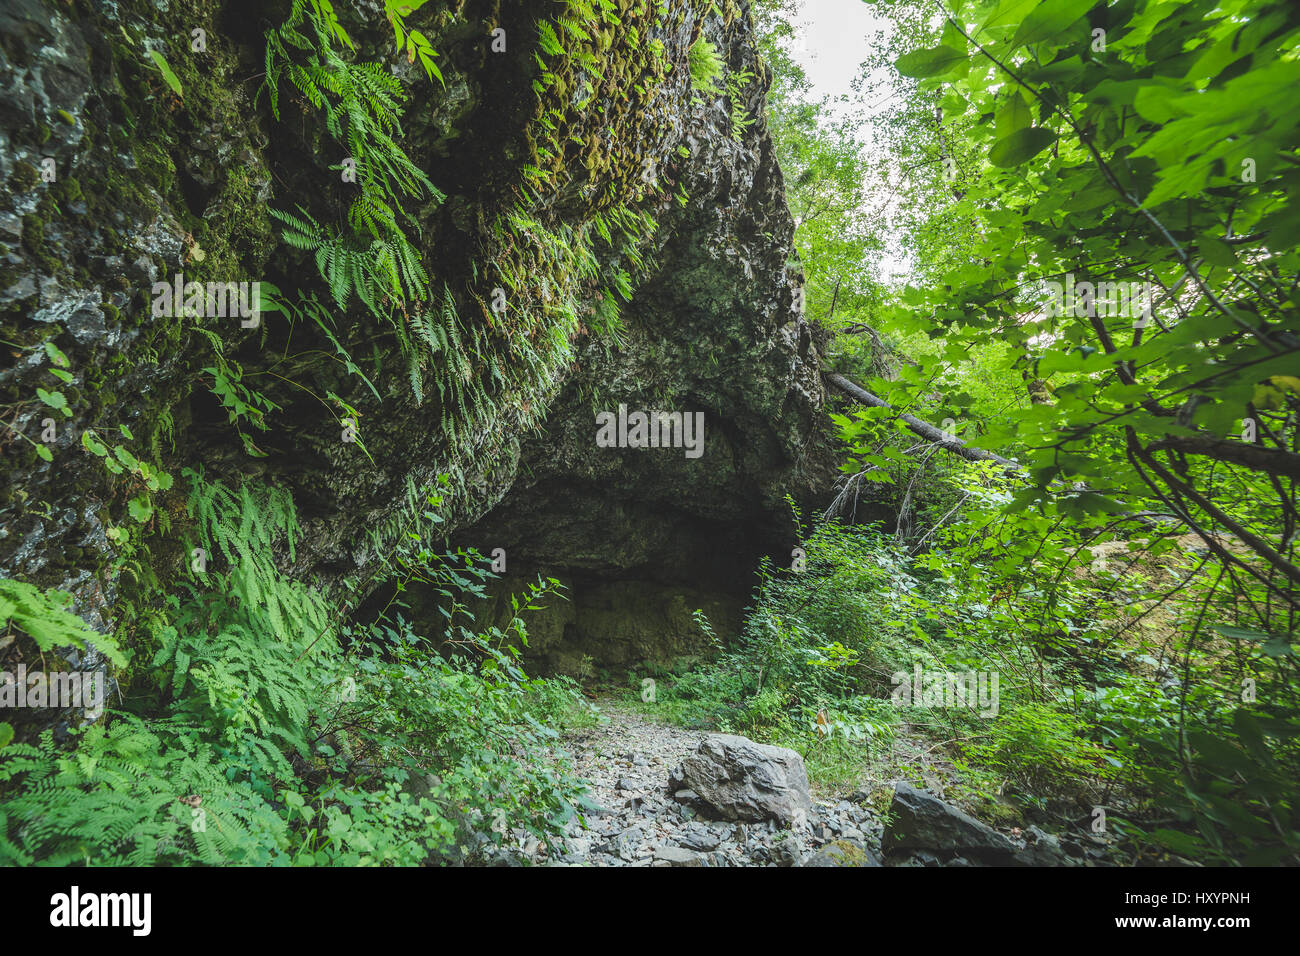 Entrance to a large cave in the forest near Washougal, Washington, USA. Stock Photo